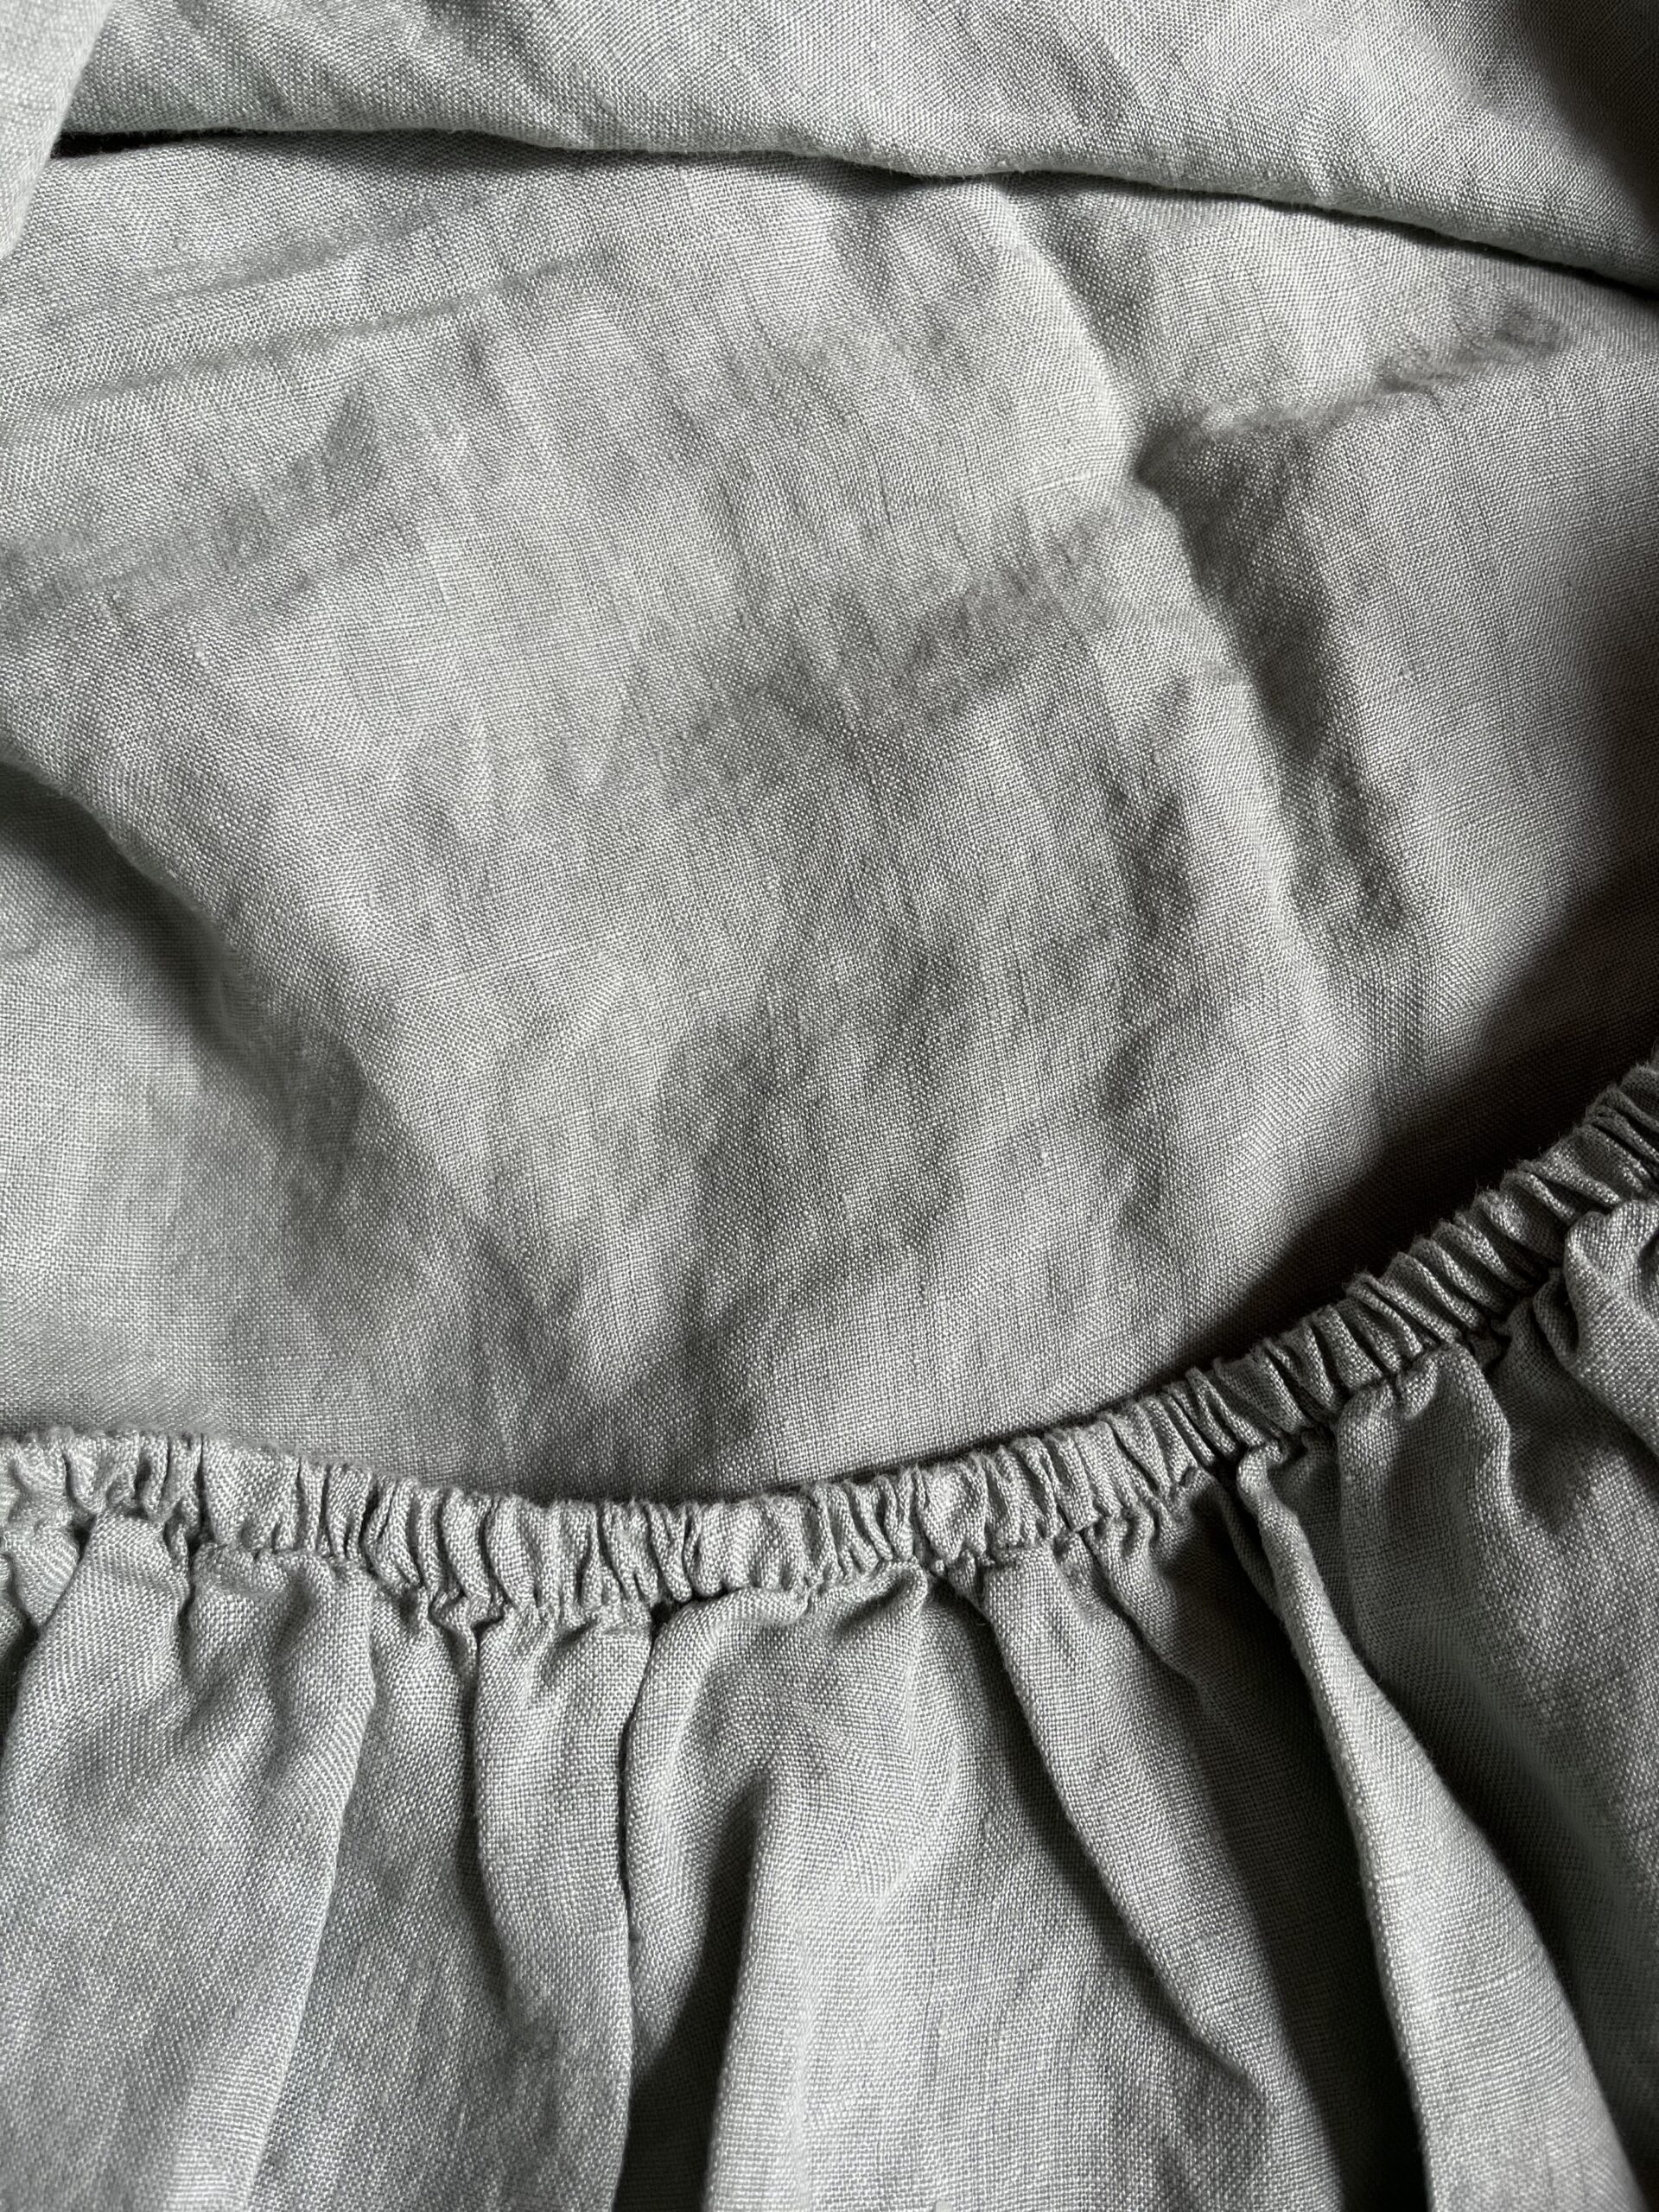 Close-up image of a light grey, crumpled fabric with an elastic waistband.